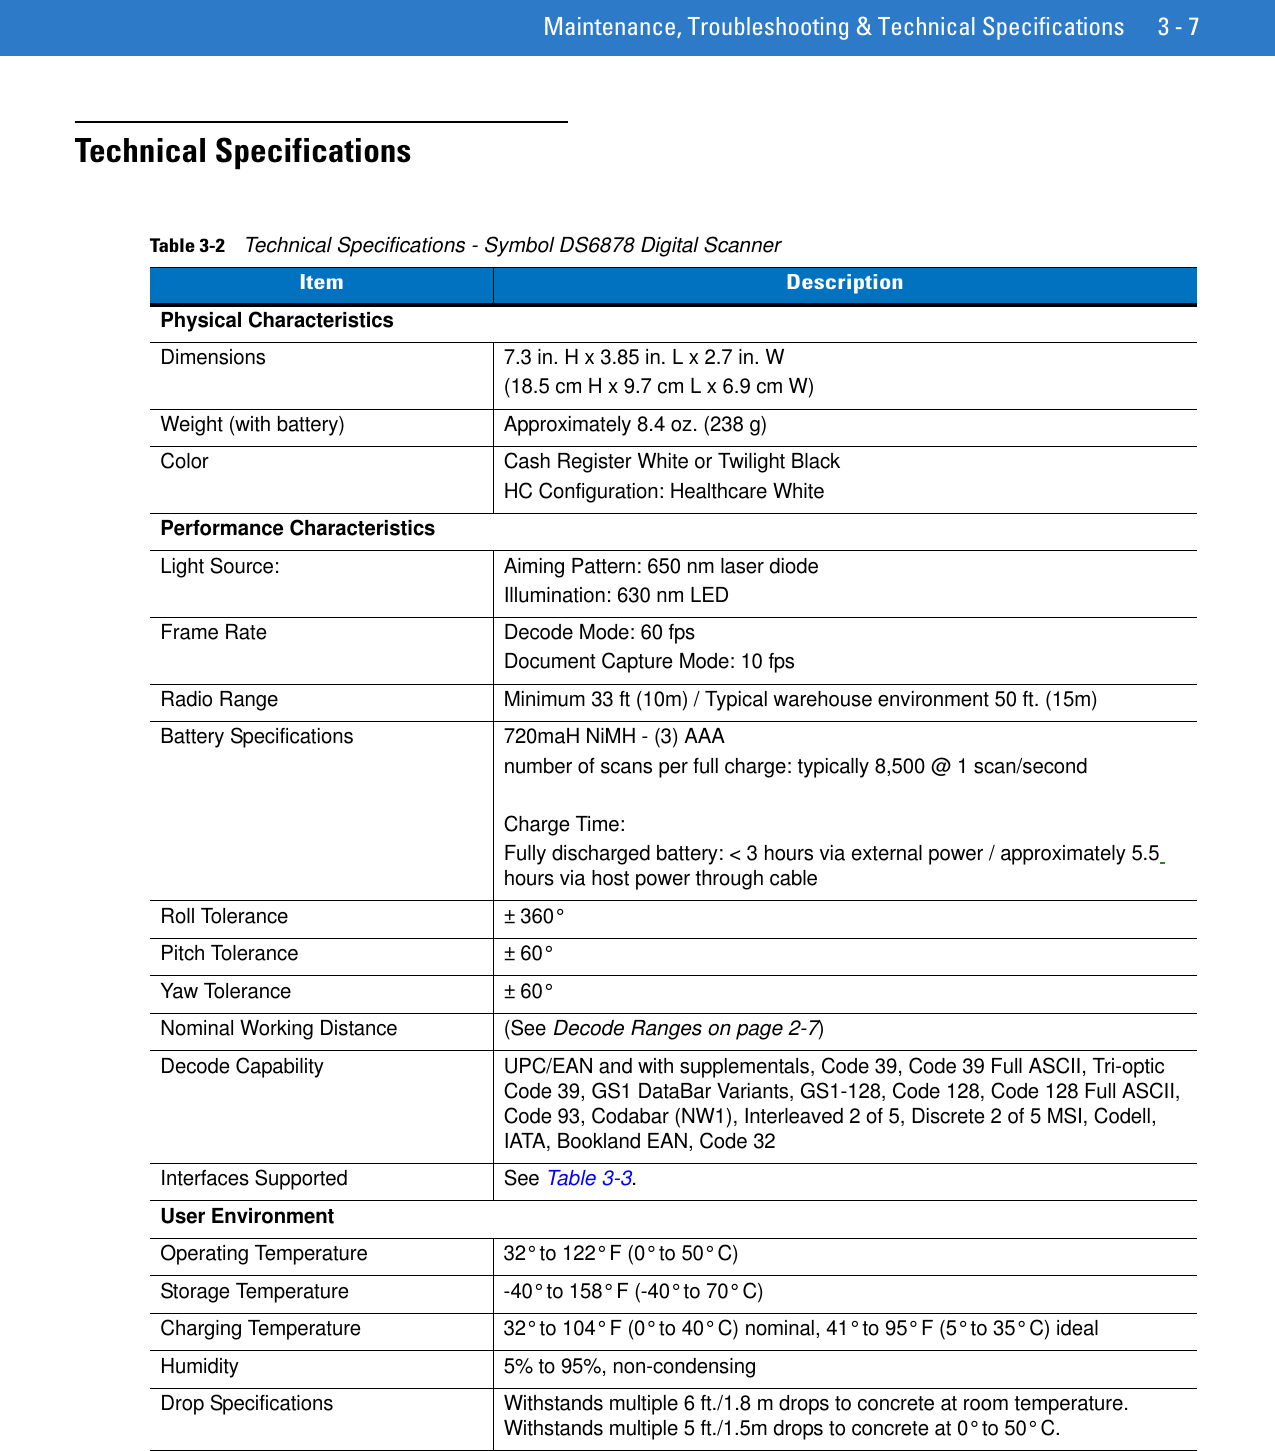 Maintenance, Troubleshooting &amp; Technical Specifications 3 - 7Technical SpecificationsTable 3-2    Technical Specifications - Symbol DS6878 Digital ScannerItem DescriptionPhysical CharacteristicsDimensions 7.3 in. H x 3.85 in. L x 2.7 in. W (18.5 cm H x 9.7 cm L x 6.9 cm W)Weight (with battery) Approximately 8.4 oz. (238 g)Color Cash Register White or Twilight BlackHC Configuration: Healthcare WhitePerformance CharacteristicsLight Source:  Aiming Pattern: 650 nm laser diodeIllumination: 630 nm LEDFrame Rate Decode Mode: 60 fpsDocument Capture Mode: 10 fpsRadio Range Minimum 33 ft (10m) / Typical warehouse environment 50 ft. (15m) Battery Specifications 720maH NiMH - (3) AAAnumber of scans per full charge: typically 8,500 @ 1 scan/secondCharge Time:Fully discharged battery: &lt; 3 hours via external power / approximately 5.5 hours via host power through cableRoll Tolerance ± 360°Pitch Tolerance ± 60° Yaw Tolerance ± 60°Nominal Working Distance (See Decode Ranges on page 2-7)Decode Capability UPC/EAN and with supplementals, Code 39, Code 39 Full ASCII, Tri-optic Code 39, GS1 DataBar Variants, GS1-128, Code 128, Code 128 Full ASCII, Code 93, Codabar (NW1), Interleaved 2 of 5, Discrete 2 of 5 MSI, Codell, IATA, Bookland EAN, Code 32Interfaces Supported See Table 3-3.User EnvironmentOperating Temperature 32° to 122° F (0° to 50° C)Storage Temperature -40° to 158° F (-40° to 70° C)Charging Temperature 32° to 104° F (0° to 40° C) nominal, 41° to 95° F (5° to 35° C) idealHumidity 5% to 95%, non-condensingDrop Specifications Withstands multiple 6 ft./1.8 m drops to concrete at room temperature.Withstands multiple 5 ft./1.5m drops to concrete at 0° to 50° C.